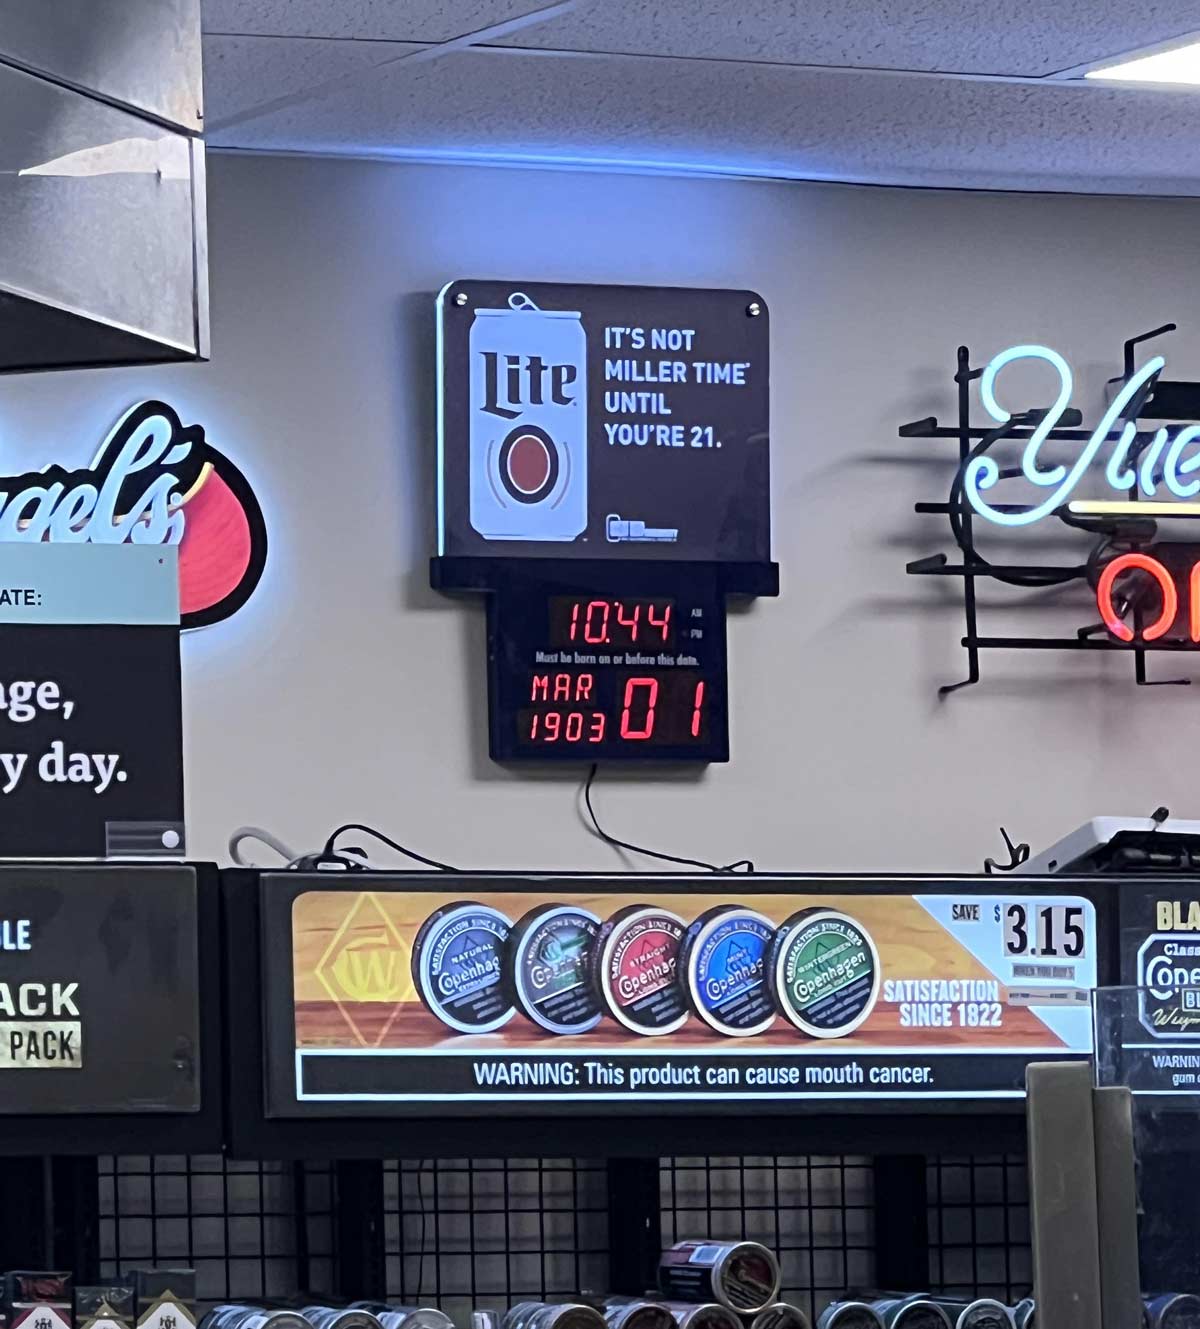 The leap year broke this gas station’s clock